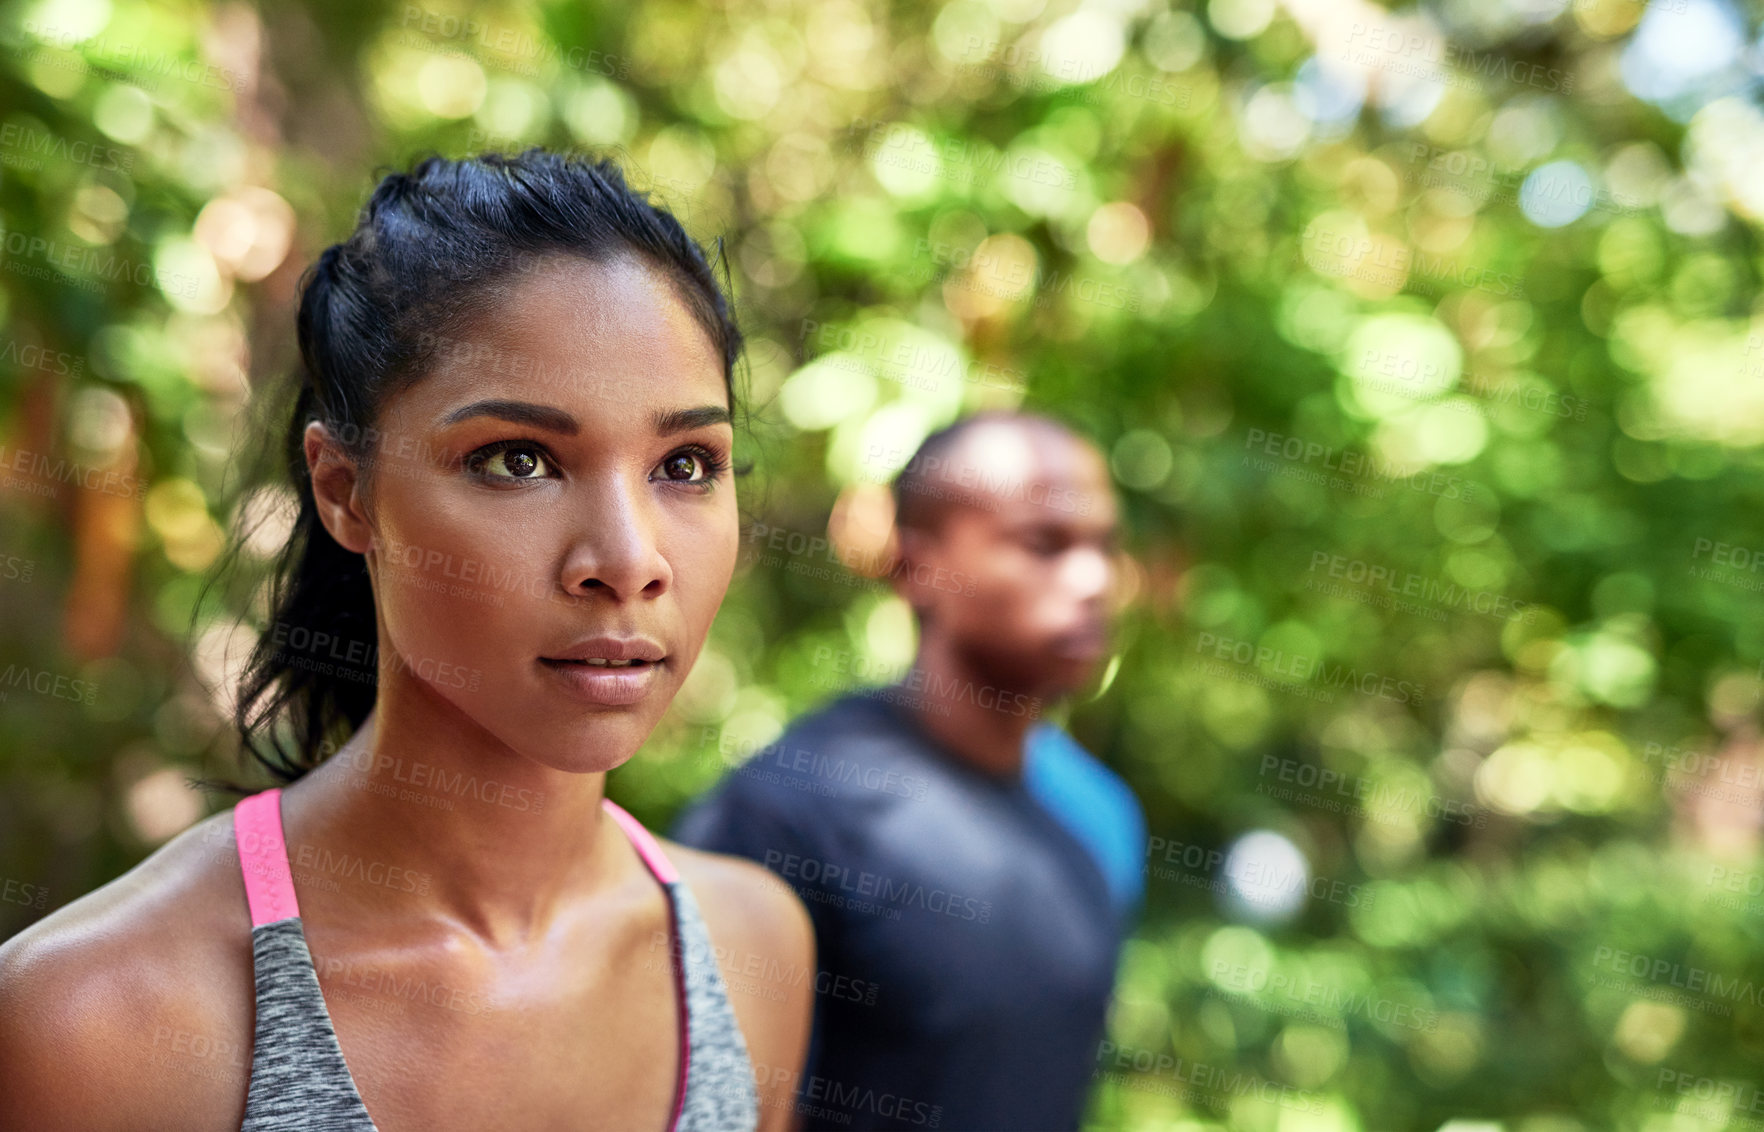 Buy stock photo Shot of an attractive young woman exercising outdoors with her boyfriend in the background